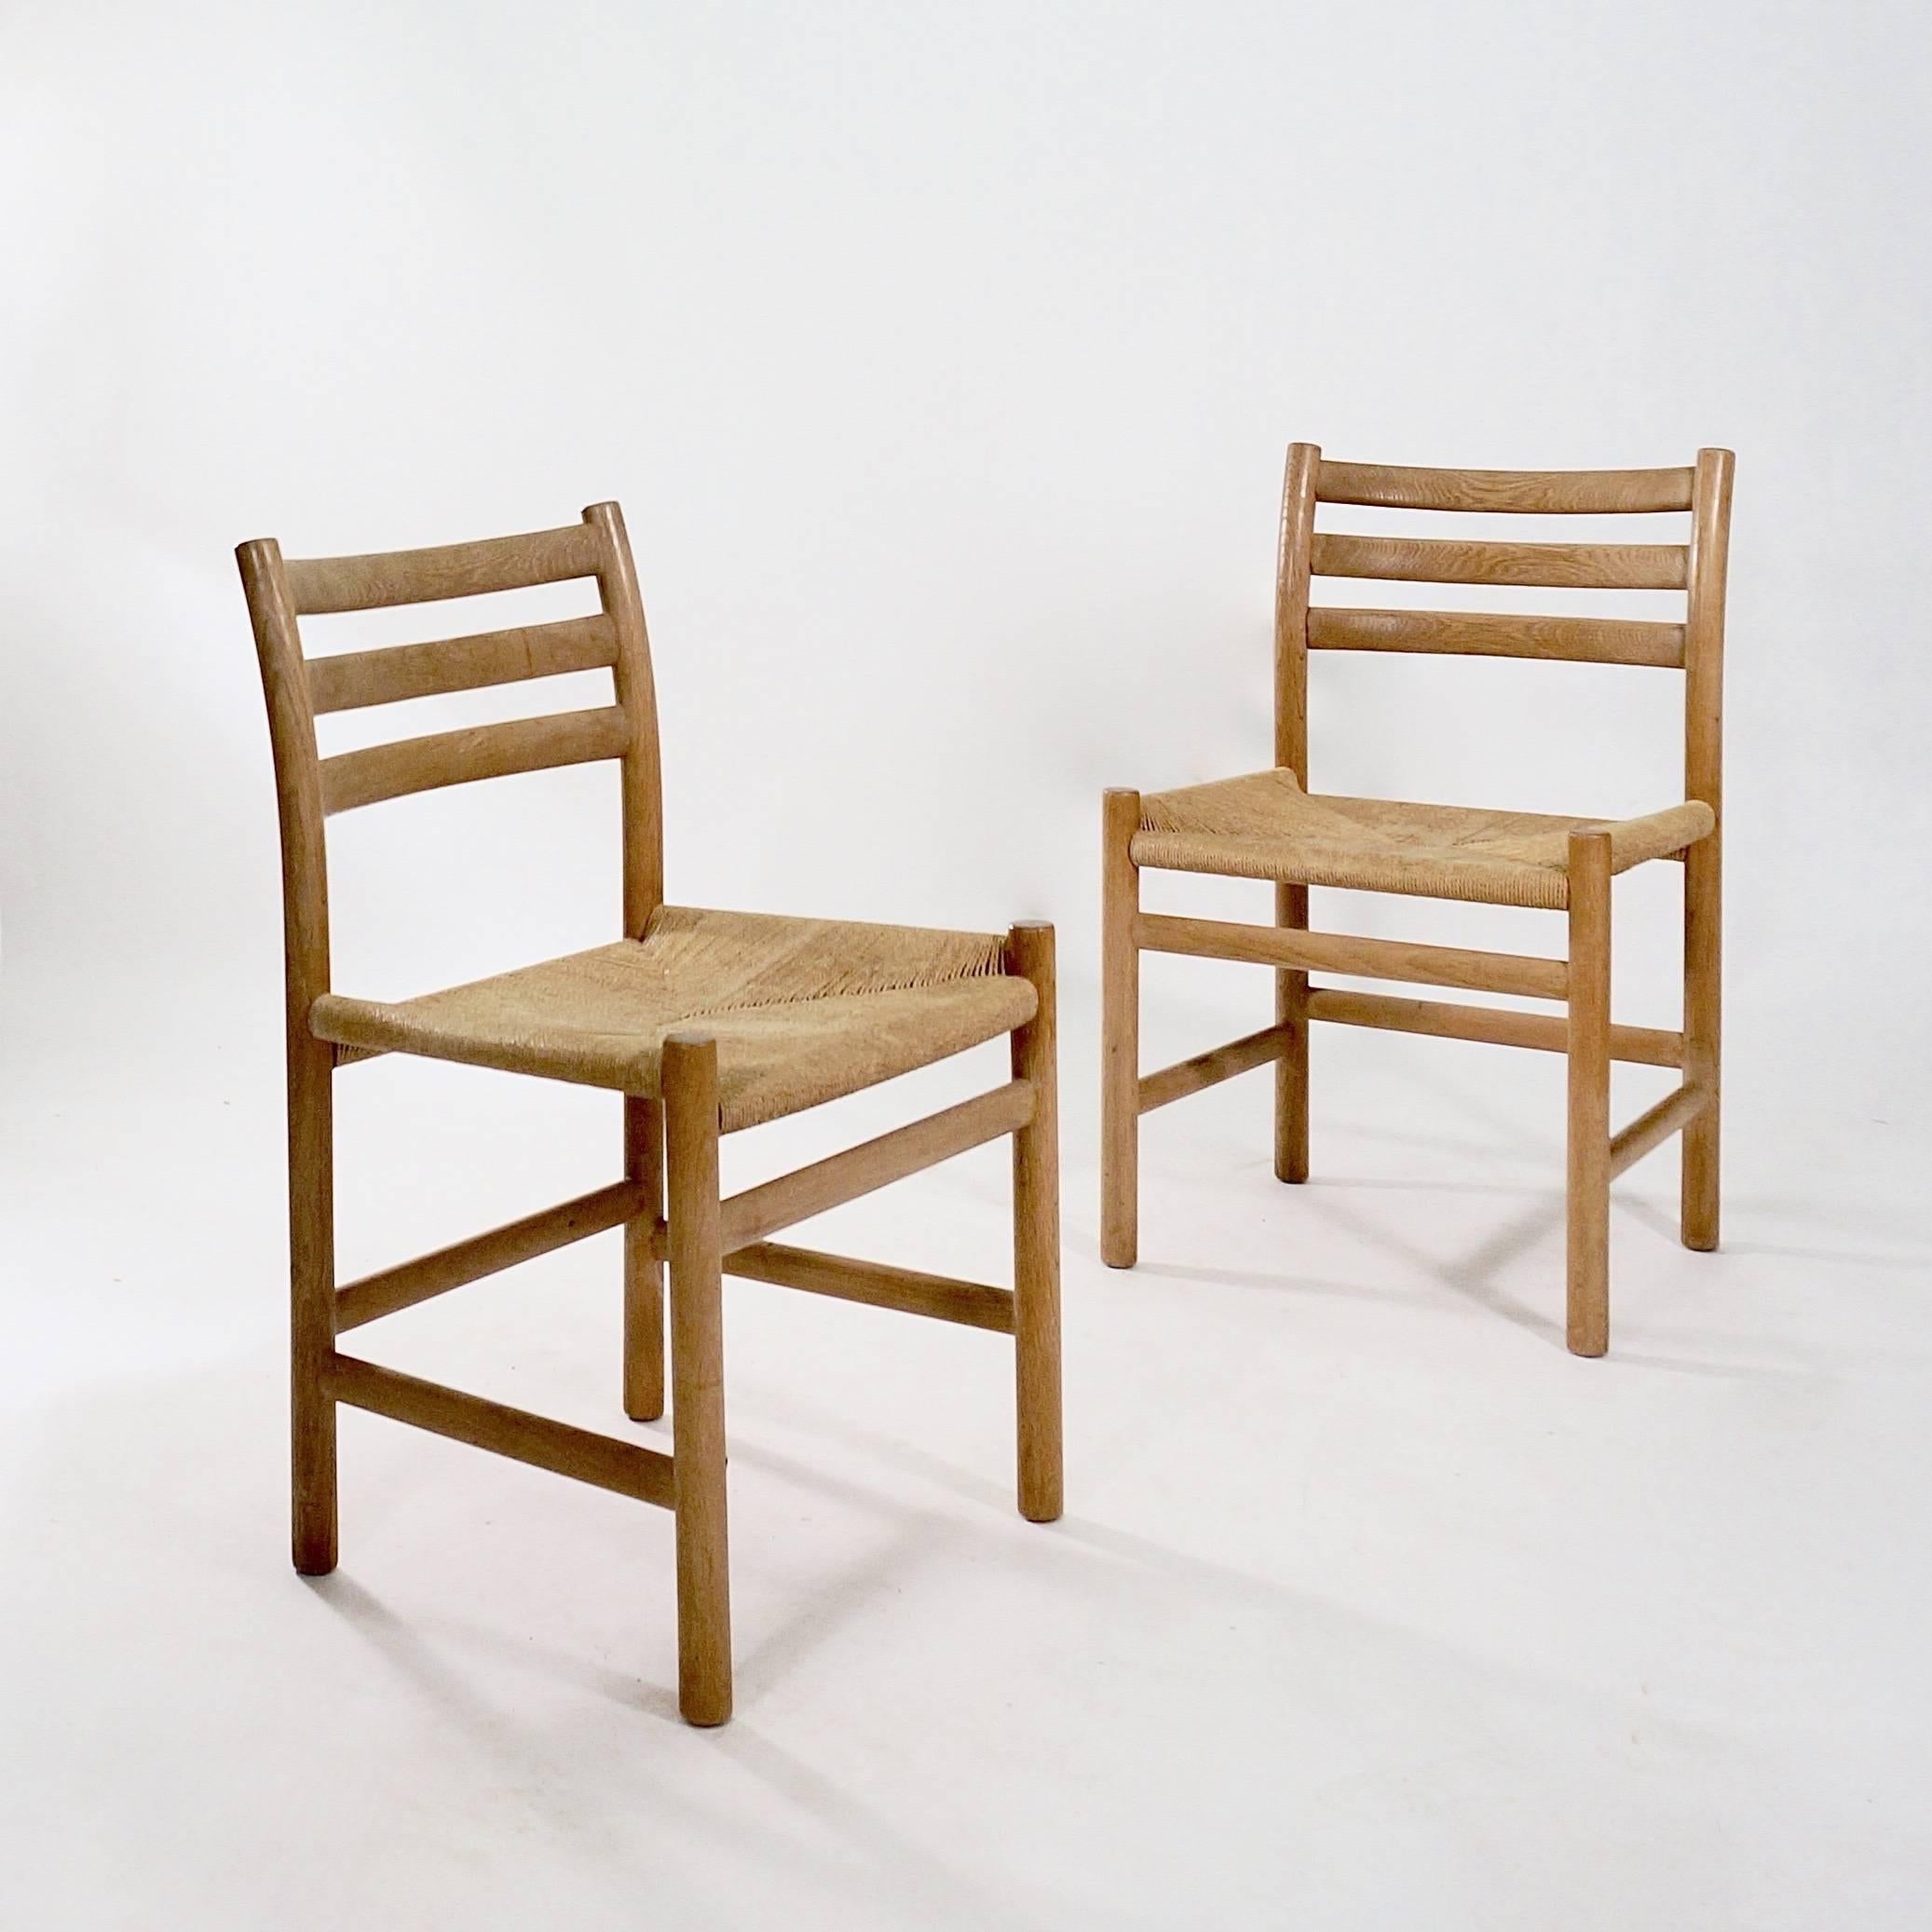 A set of four quarter-sawn oak ladderback dining chairs each with simple turned legs joined by stretchers supporting a raked and dished ladderback and a seagrass seat,

Denmark, circa 1950s.